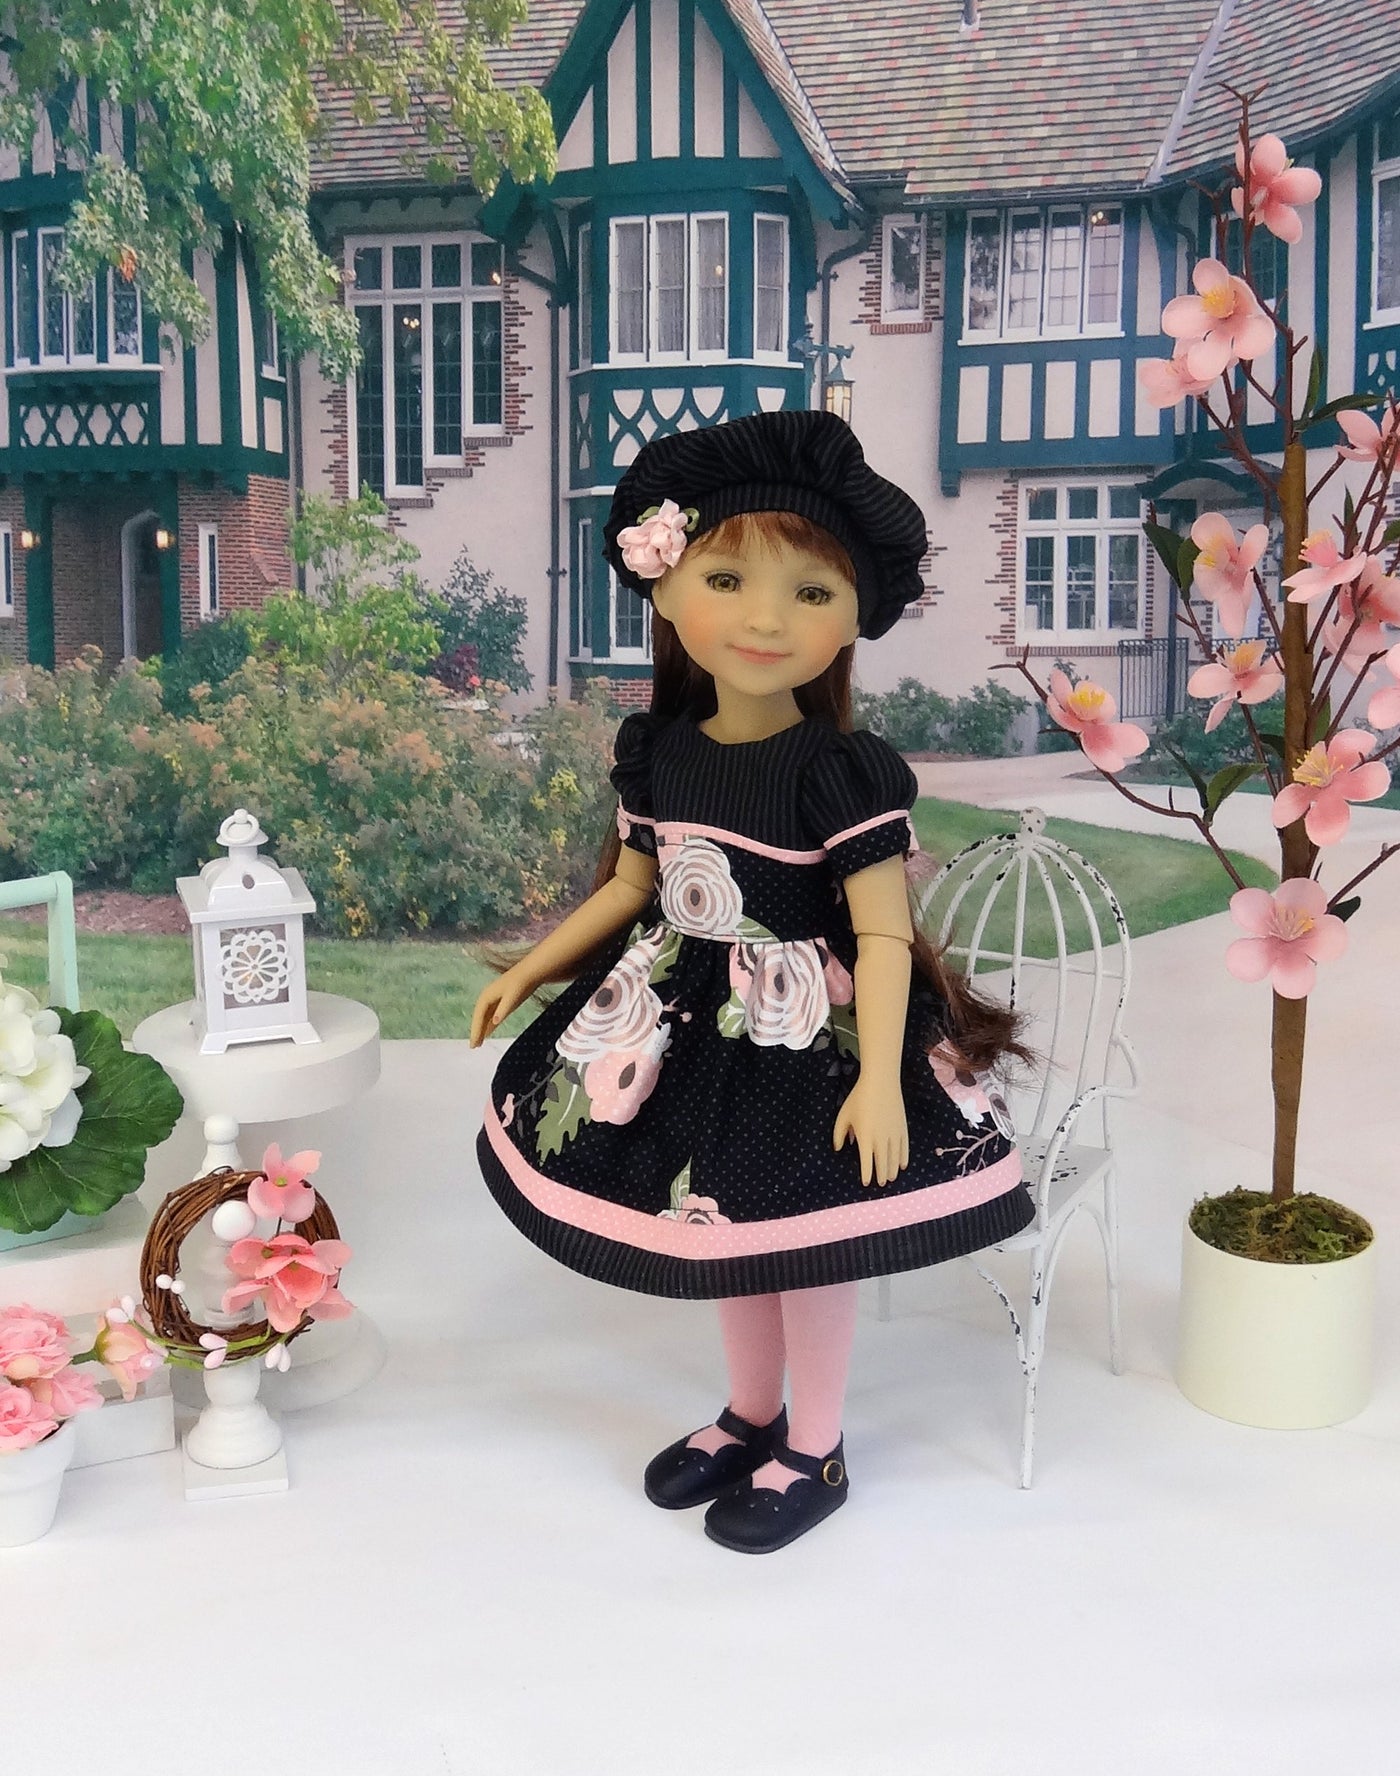 Floral Sophisticate - dress for Ruby Red Fashion Friends doll